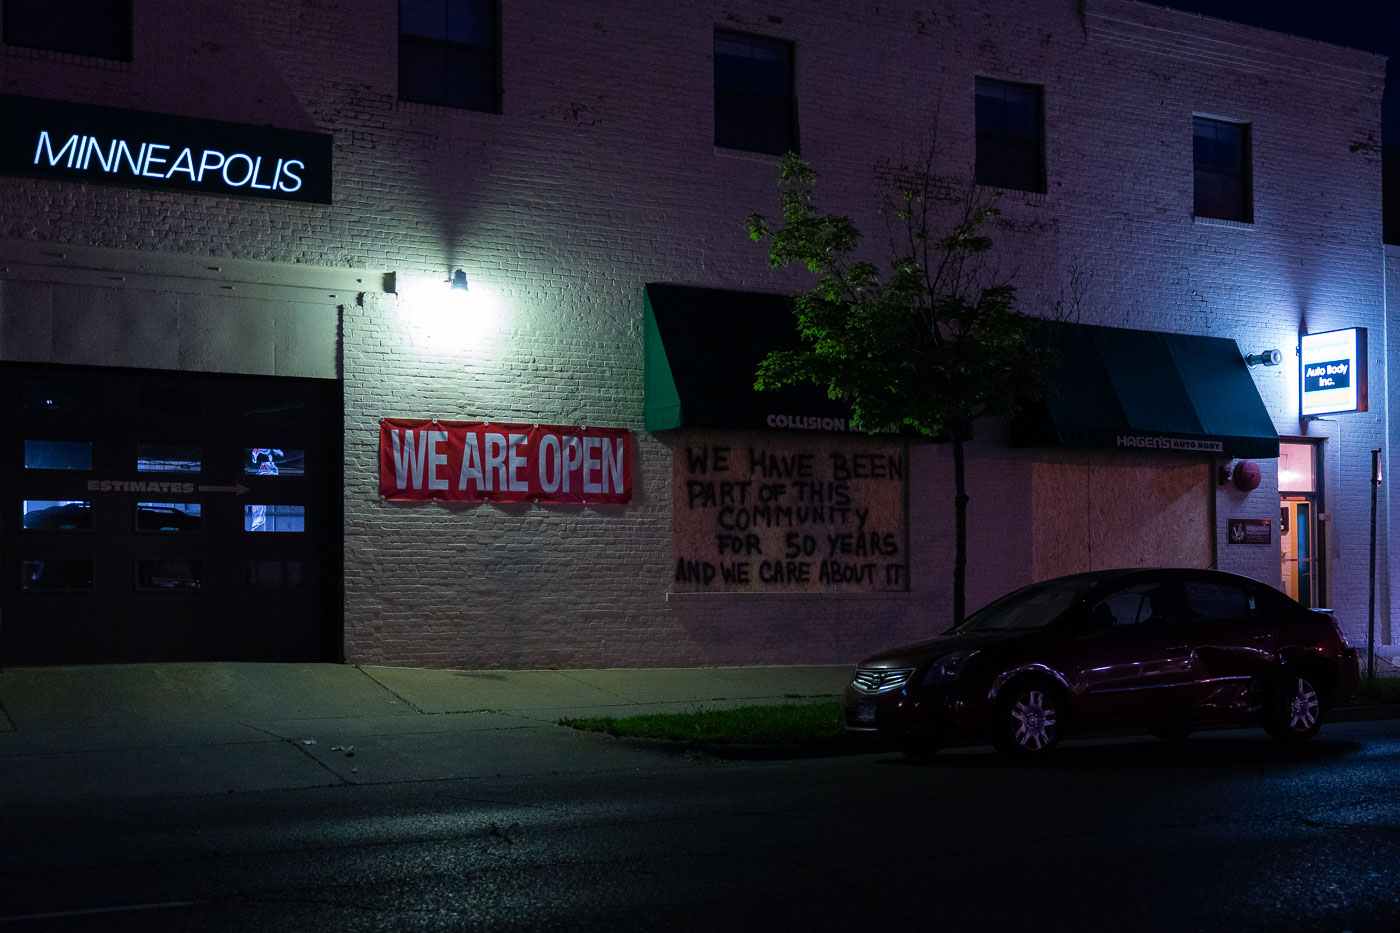 We are open sign on auto body shop on Nicollet Ave